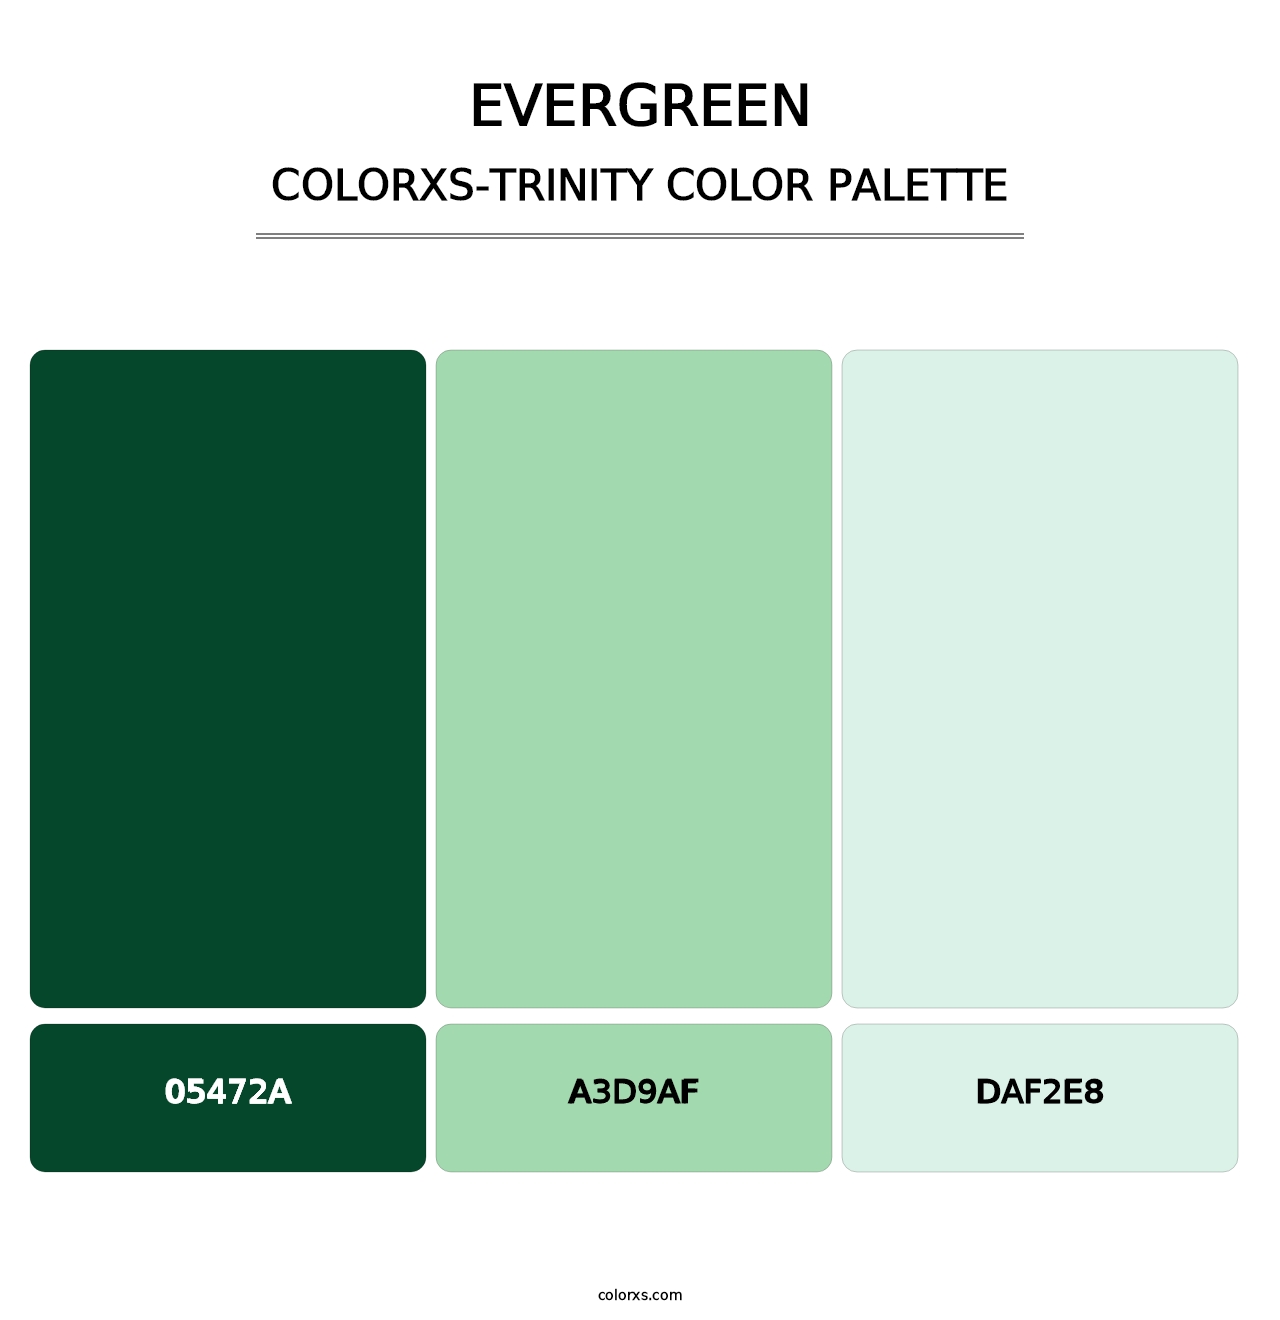 Evergreen - Colorxs Trinity Palette